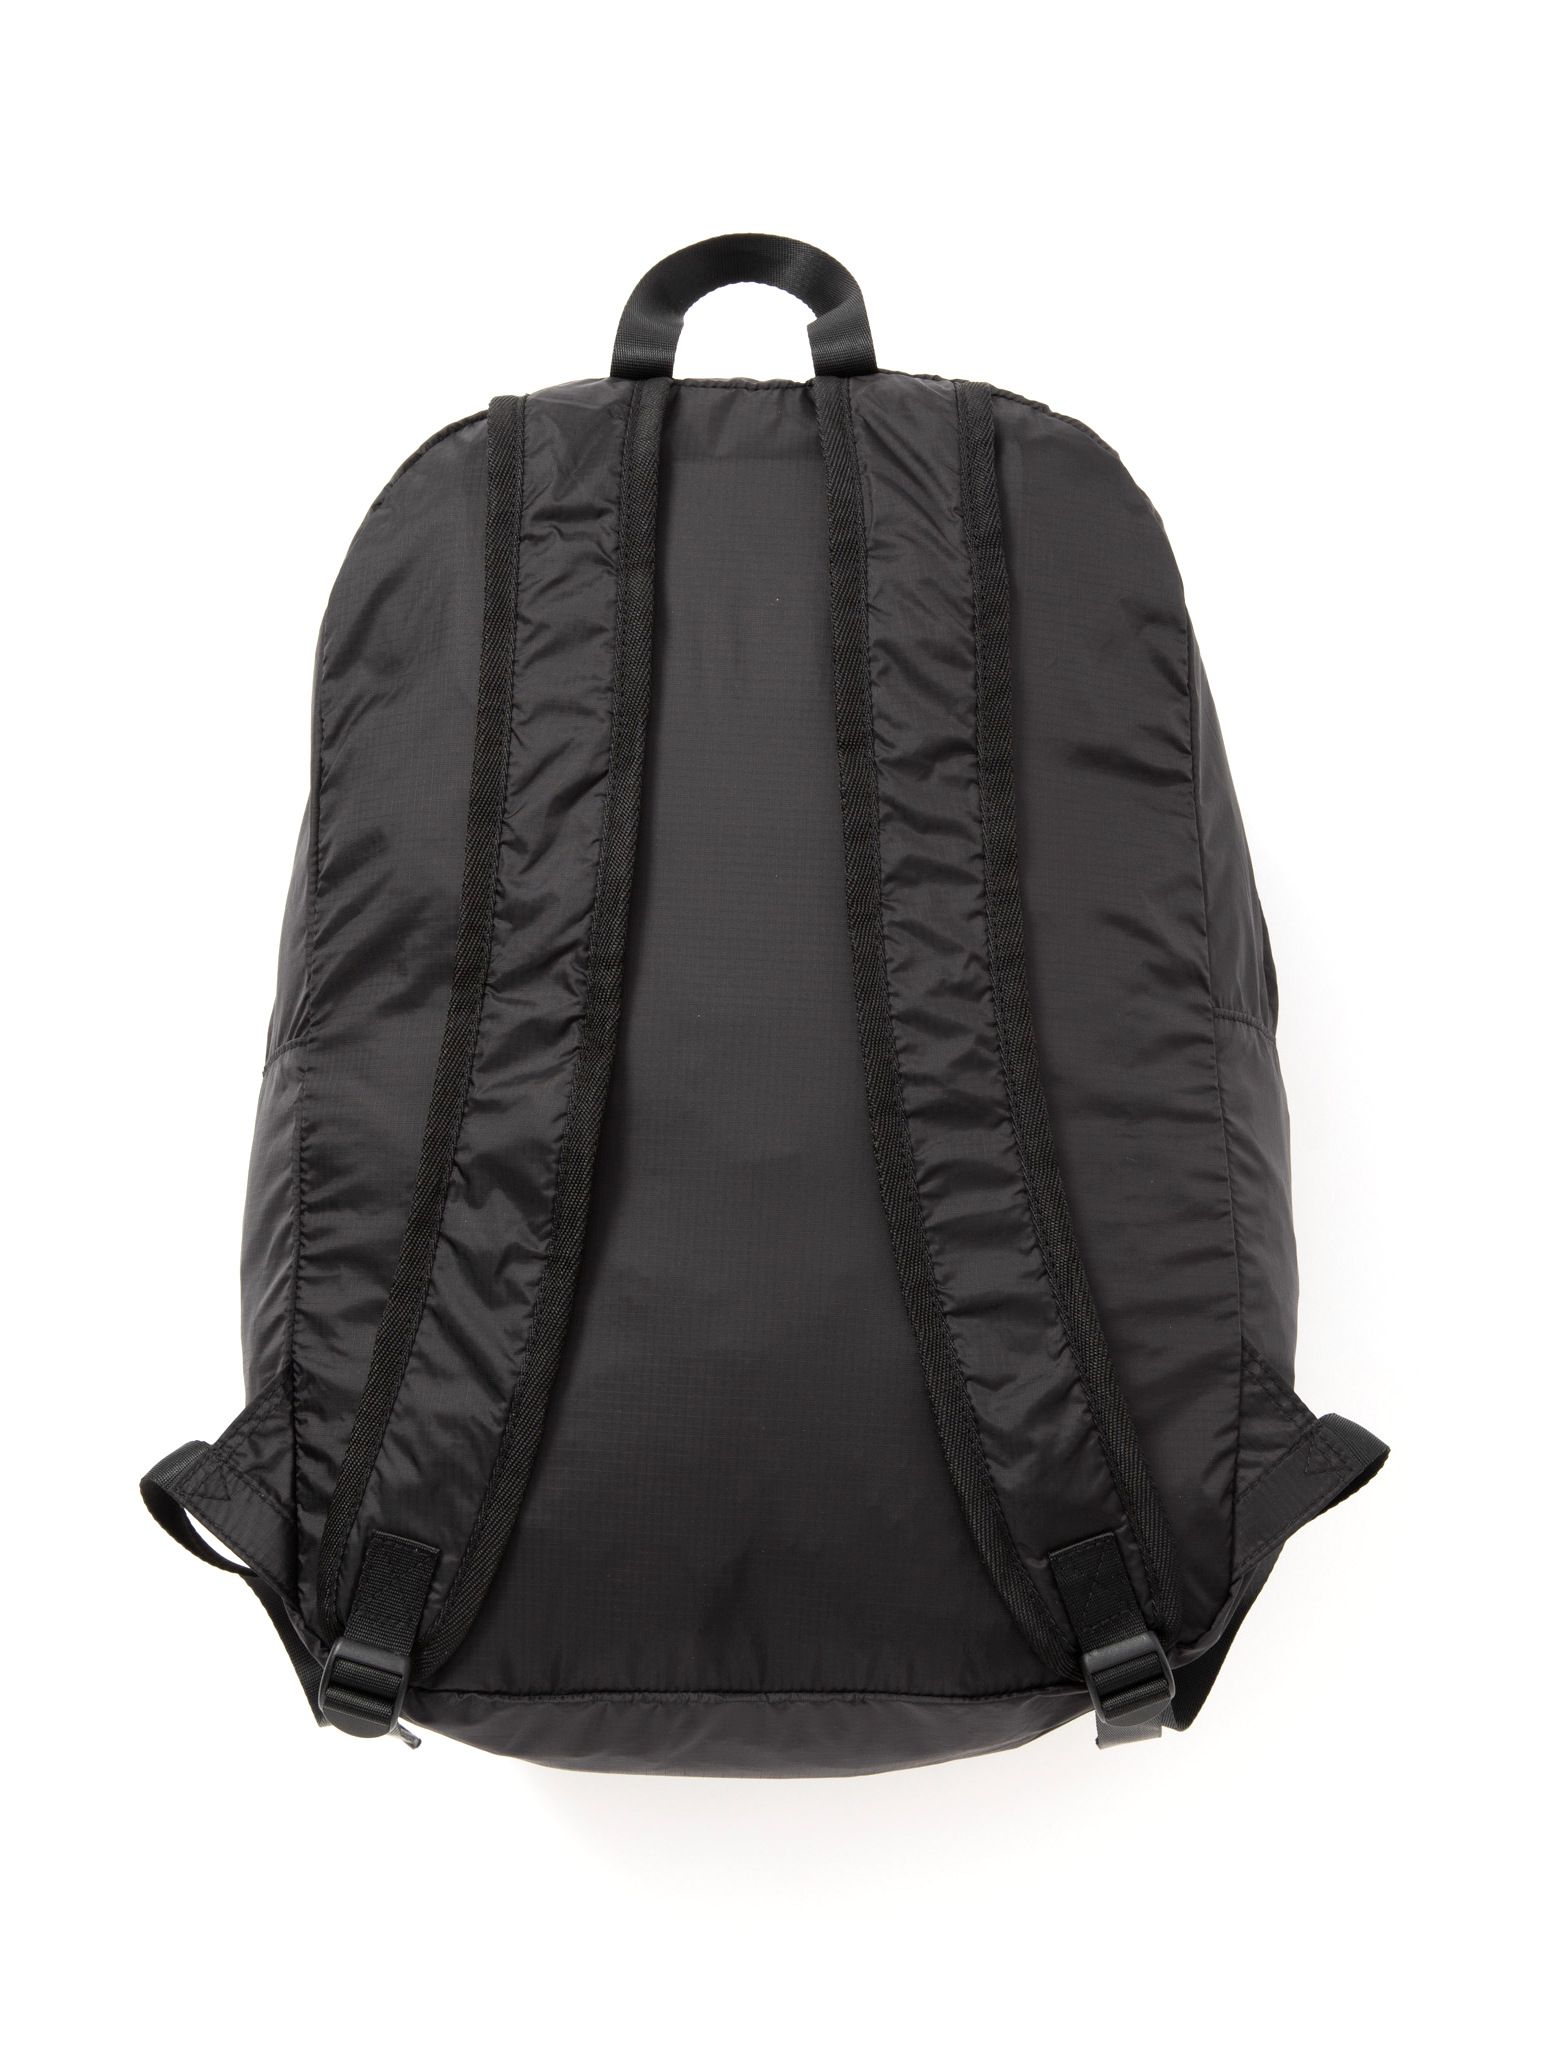 SY32 by SWEET YEARS - SY32 PACKABLE ECO BACKPACK / 10590 / エコ ...